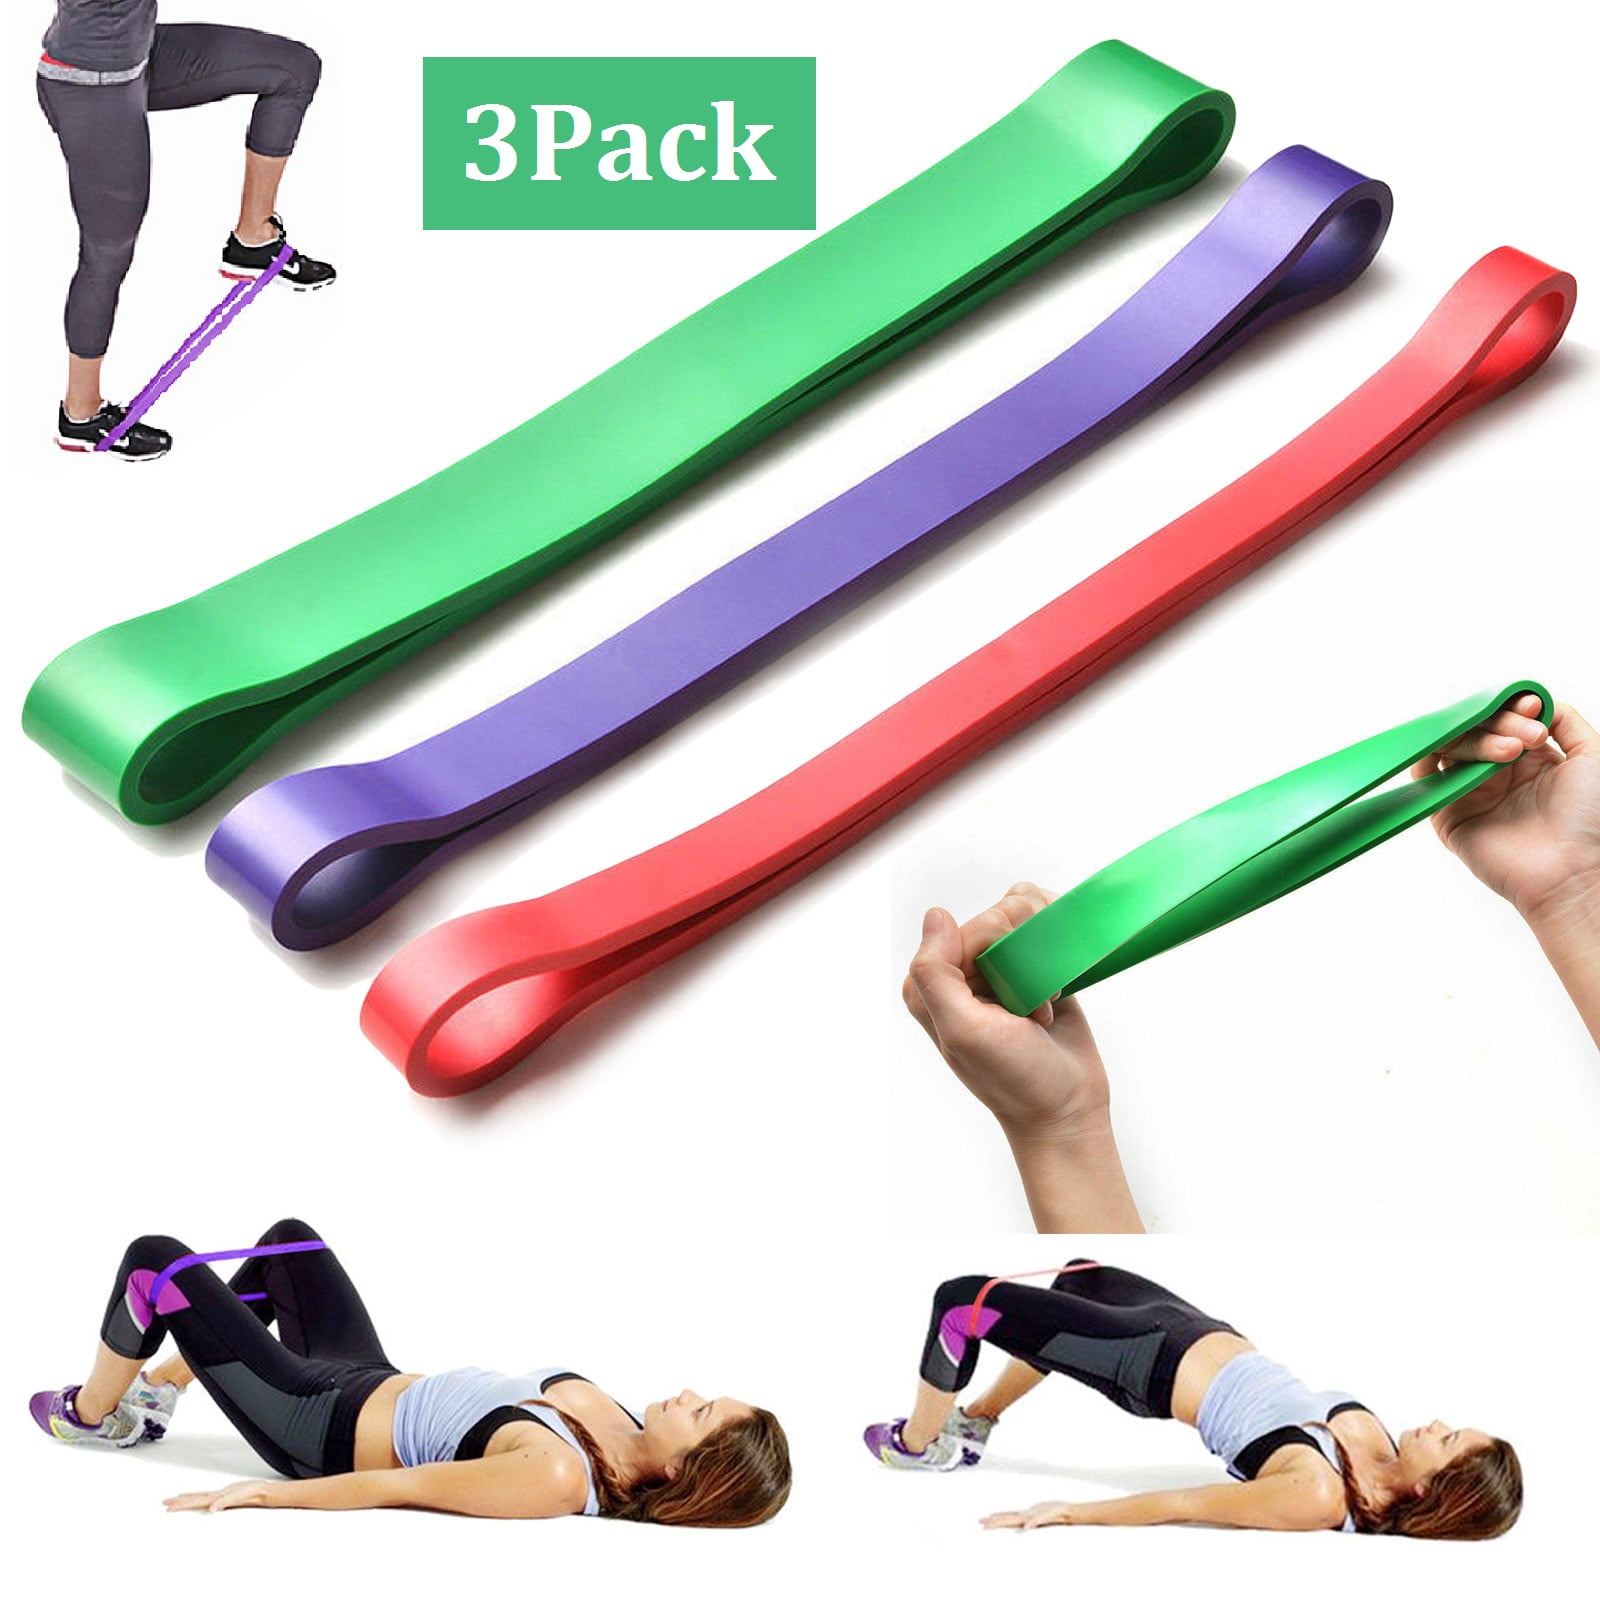 RESISTANCE EXERCISE BANDS Home Gym Workout Band Fitness Yoga Training Men Women 